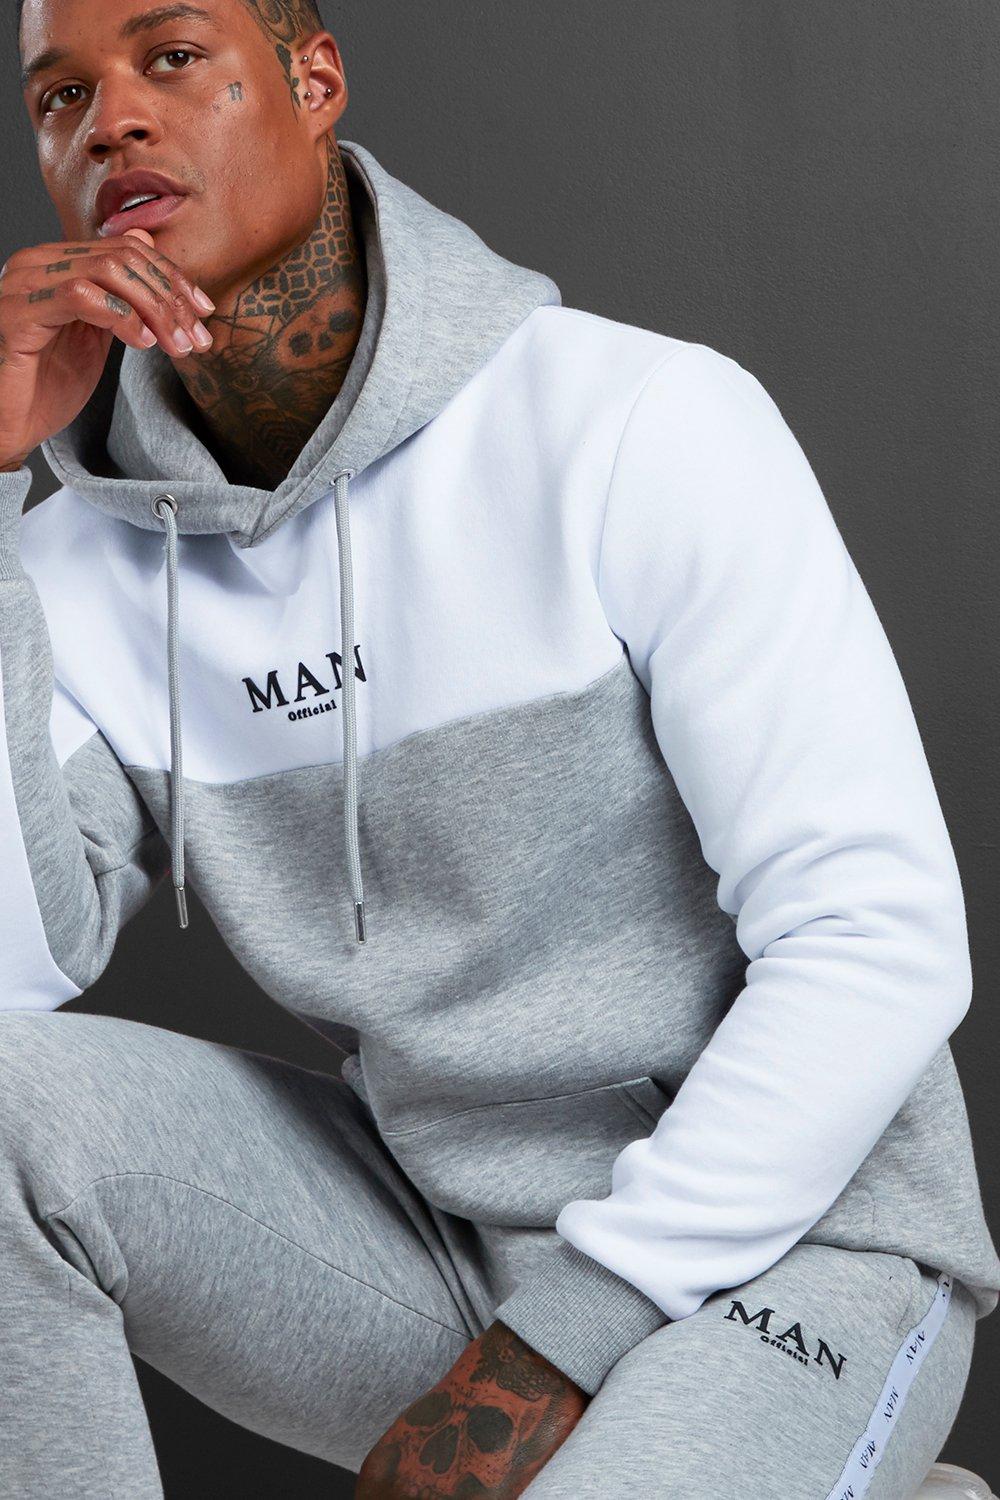 grey hooded tracksuit